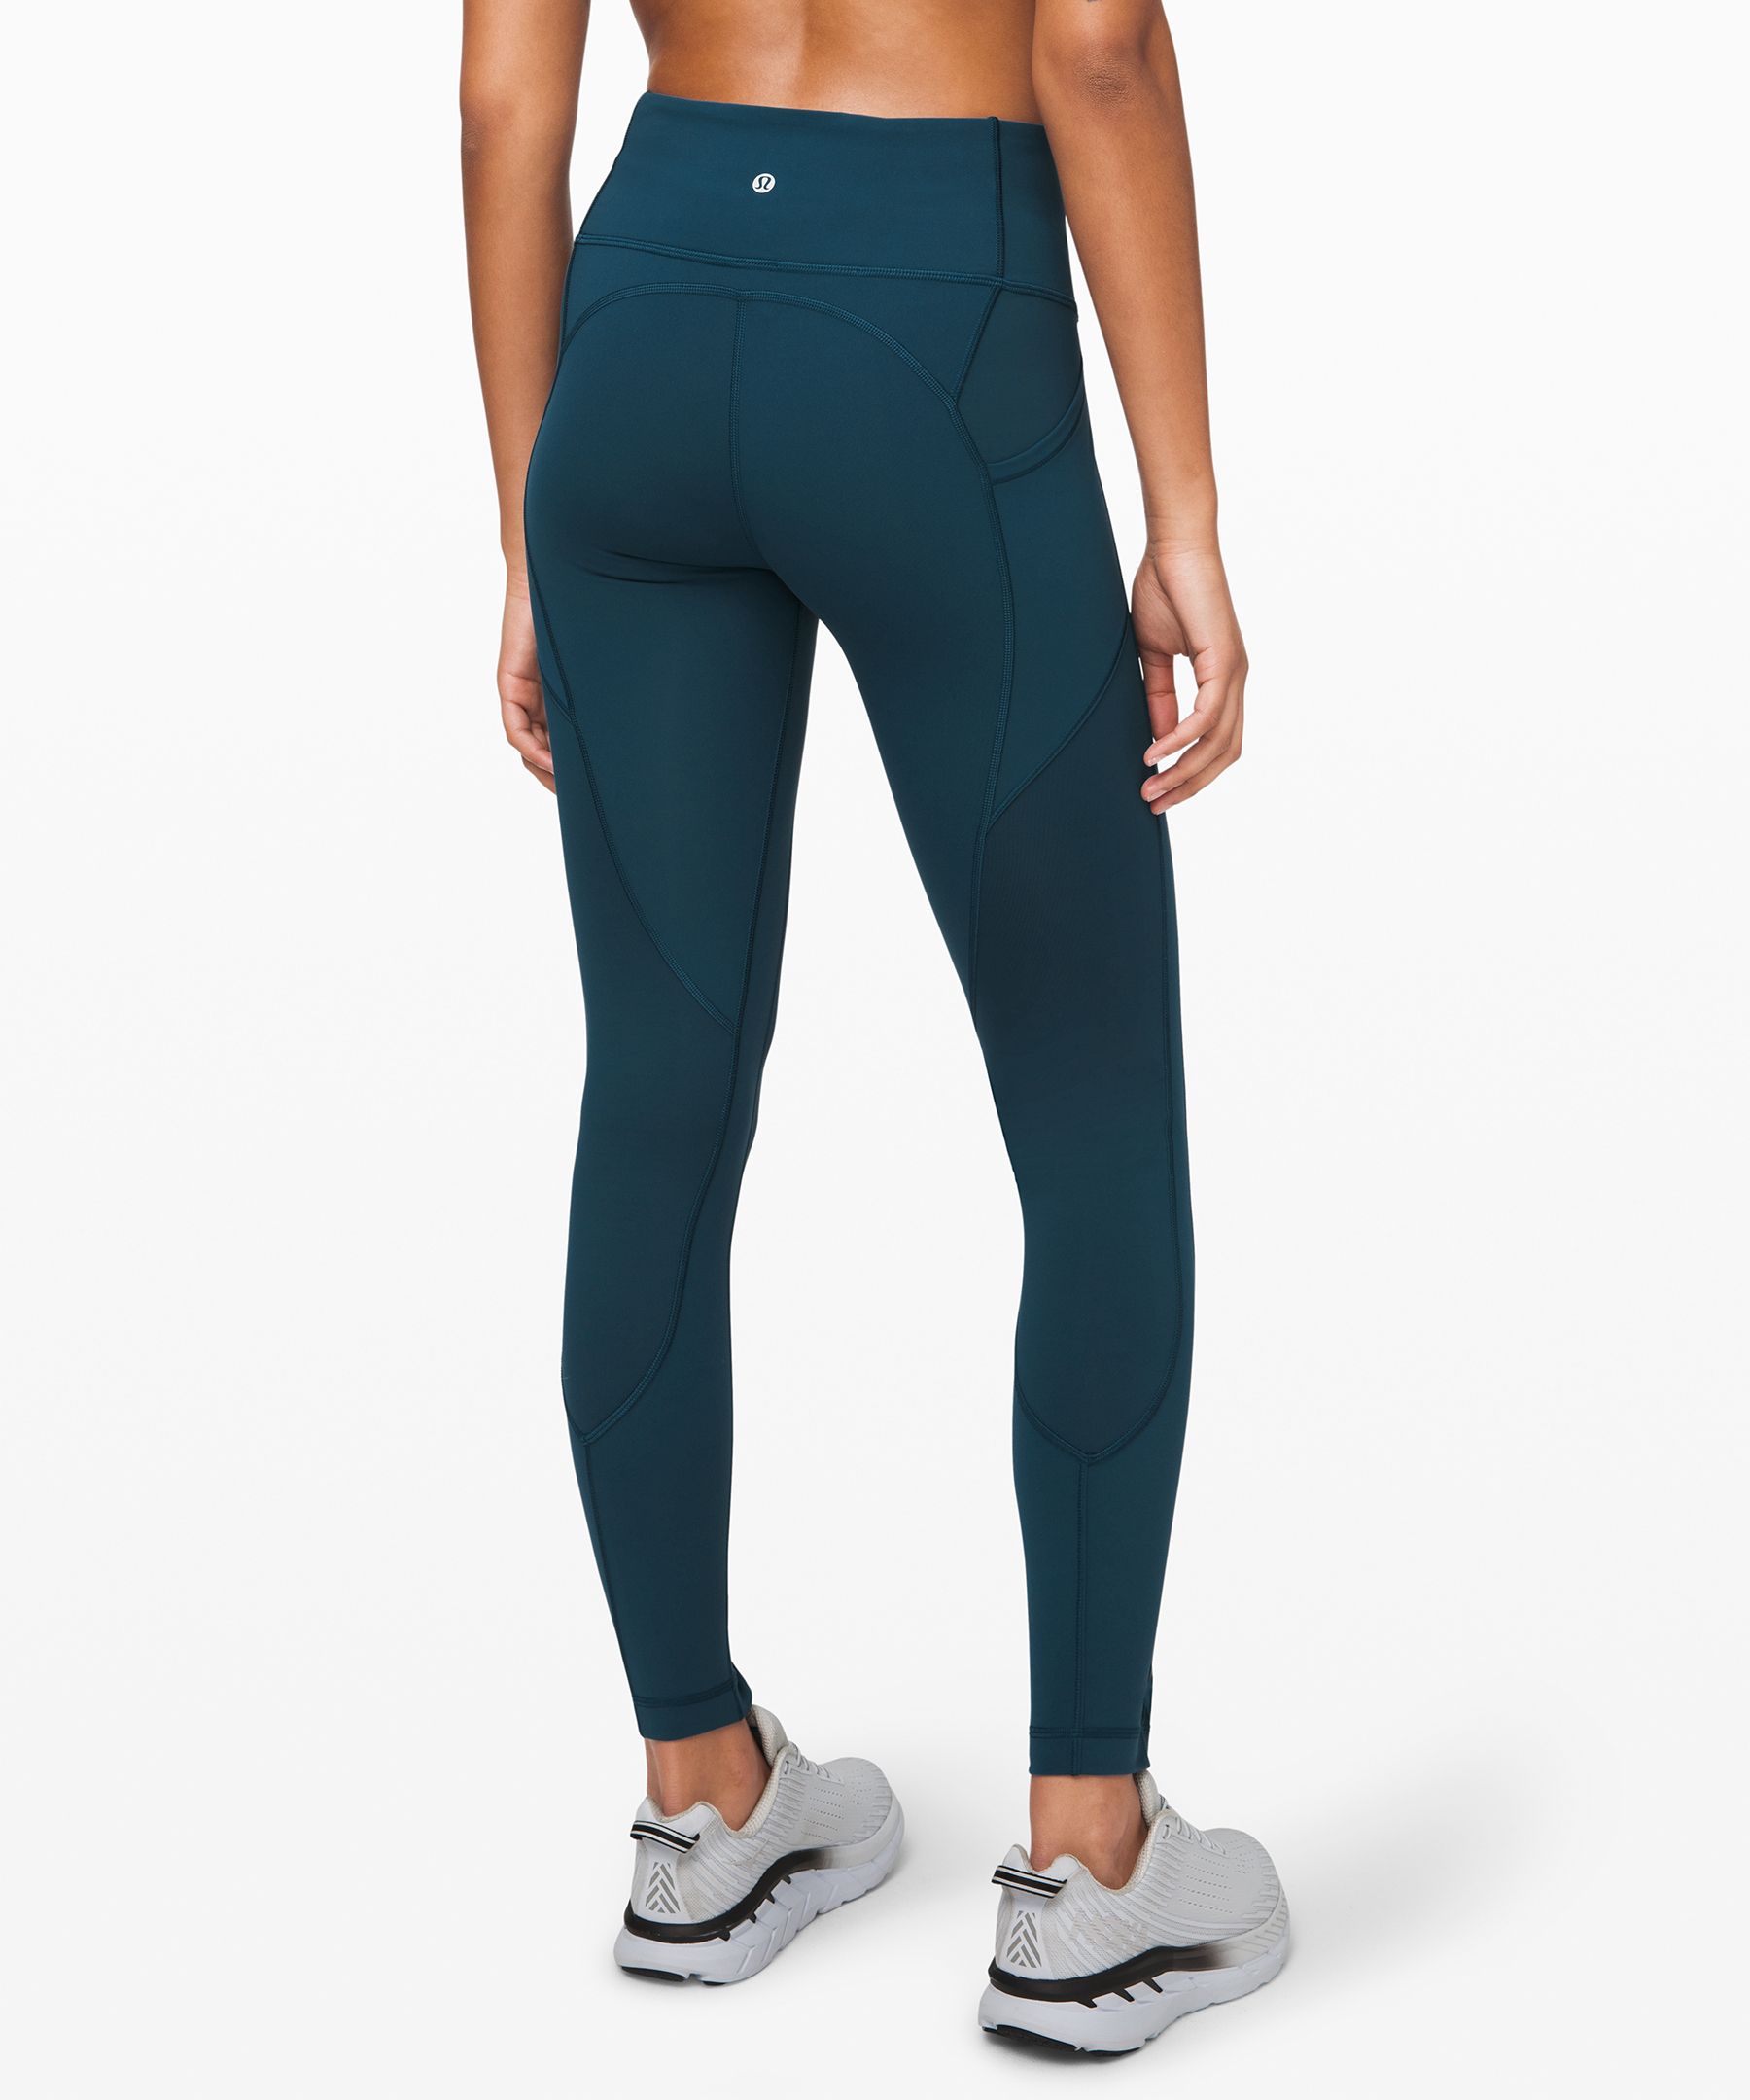 Best Tops To Wear With Spanx Leggings Women's